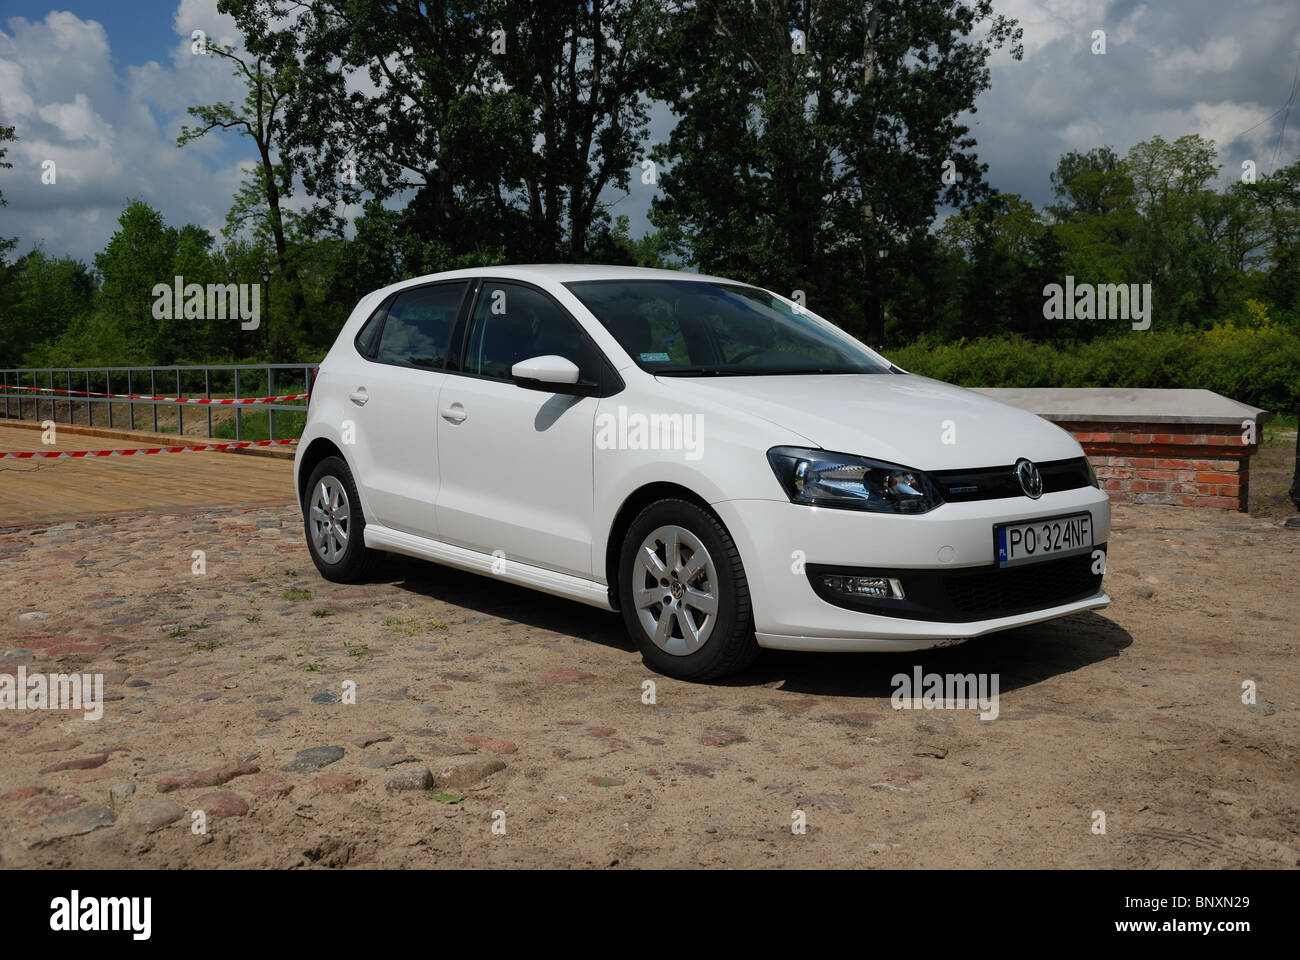 Vw Polo Bluemotion High Resolution Stock Photography -